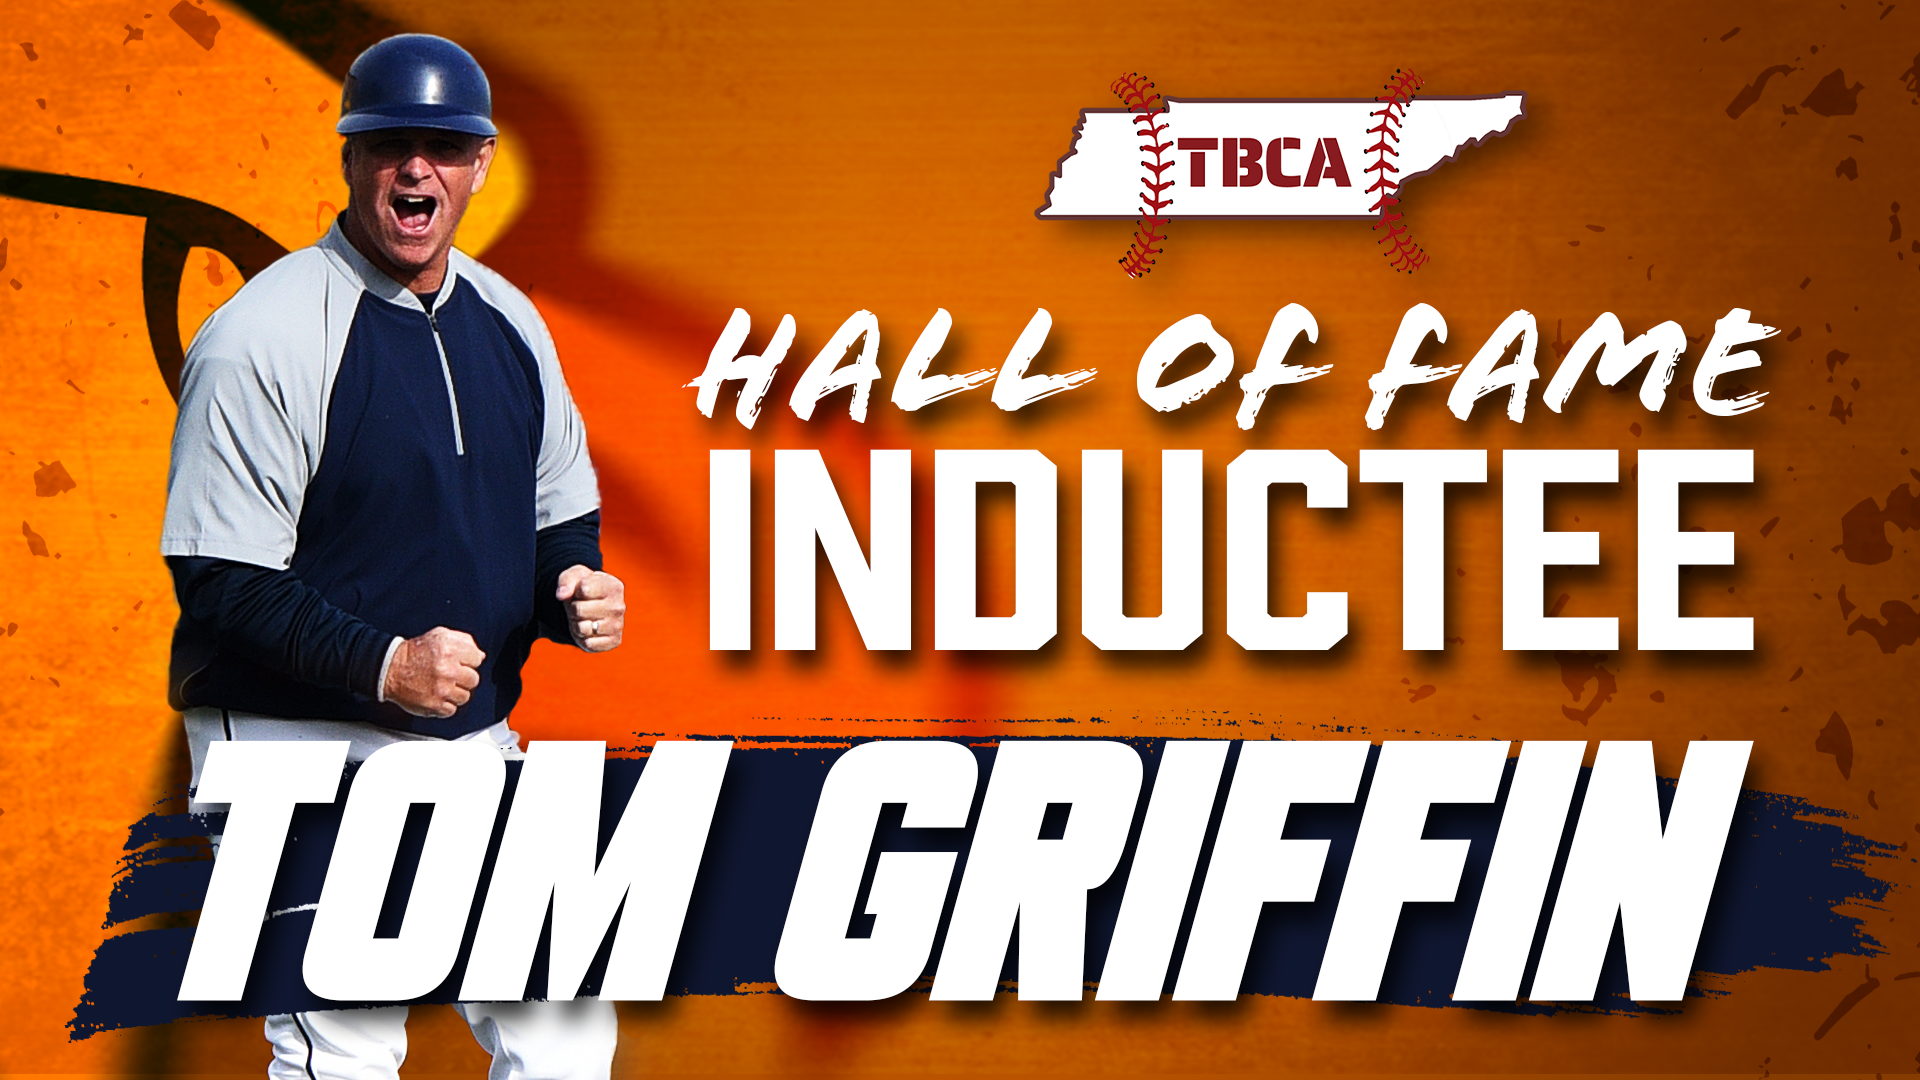 Griffin set to be inducted in the TBCA Hall of Fame